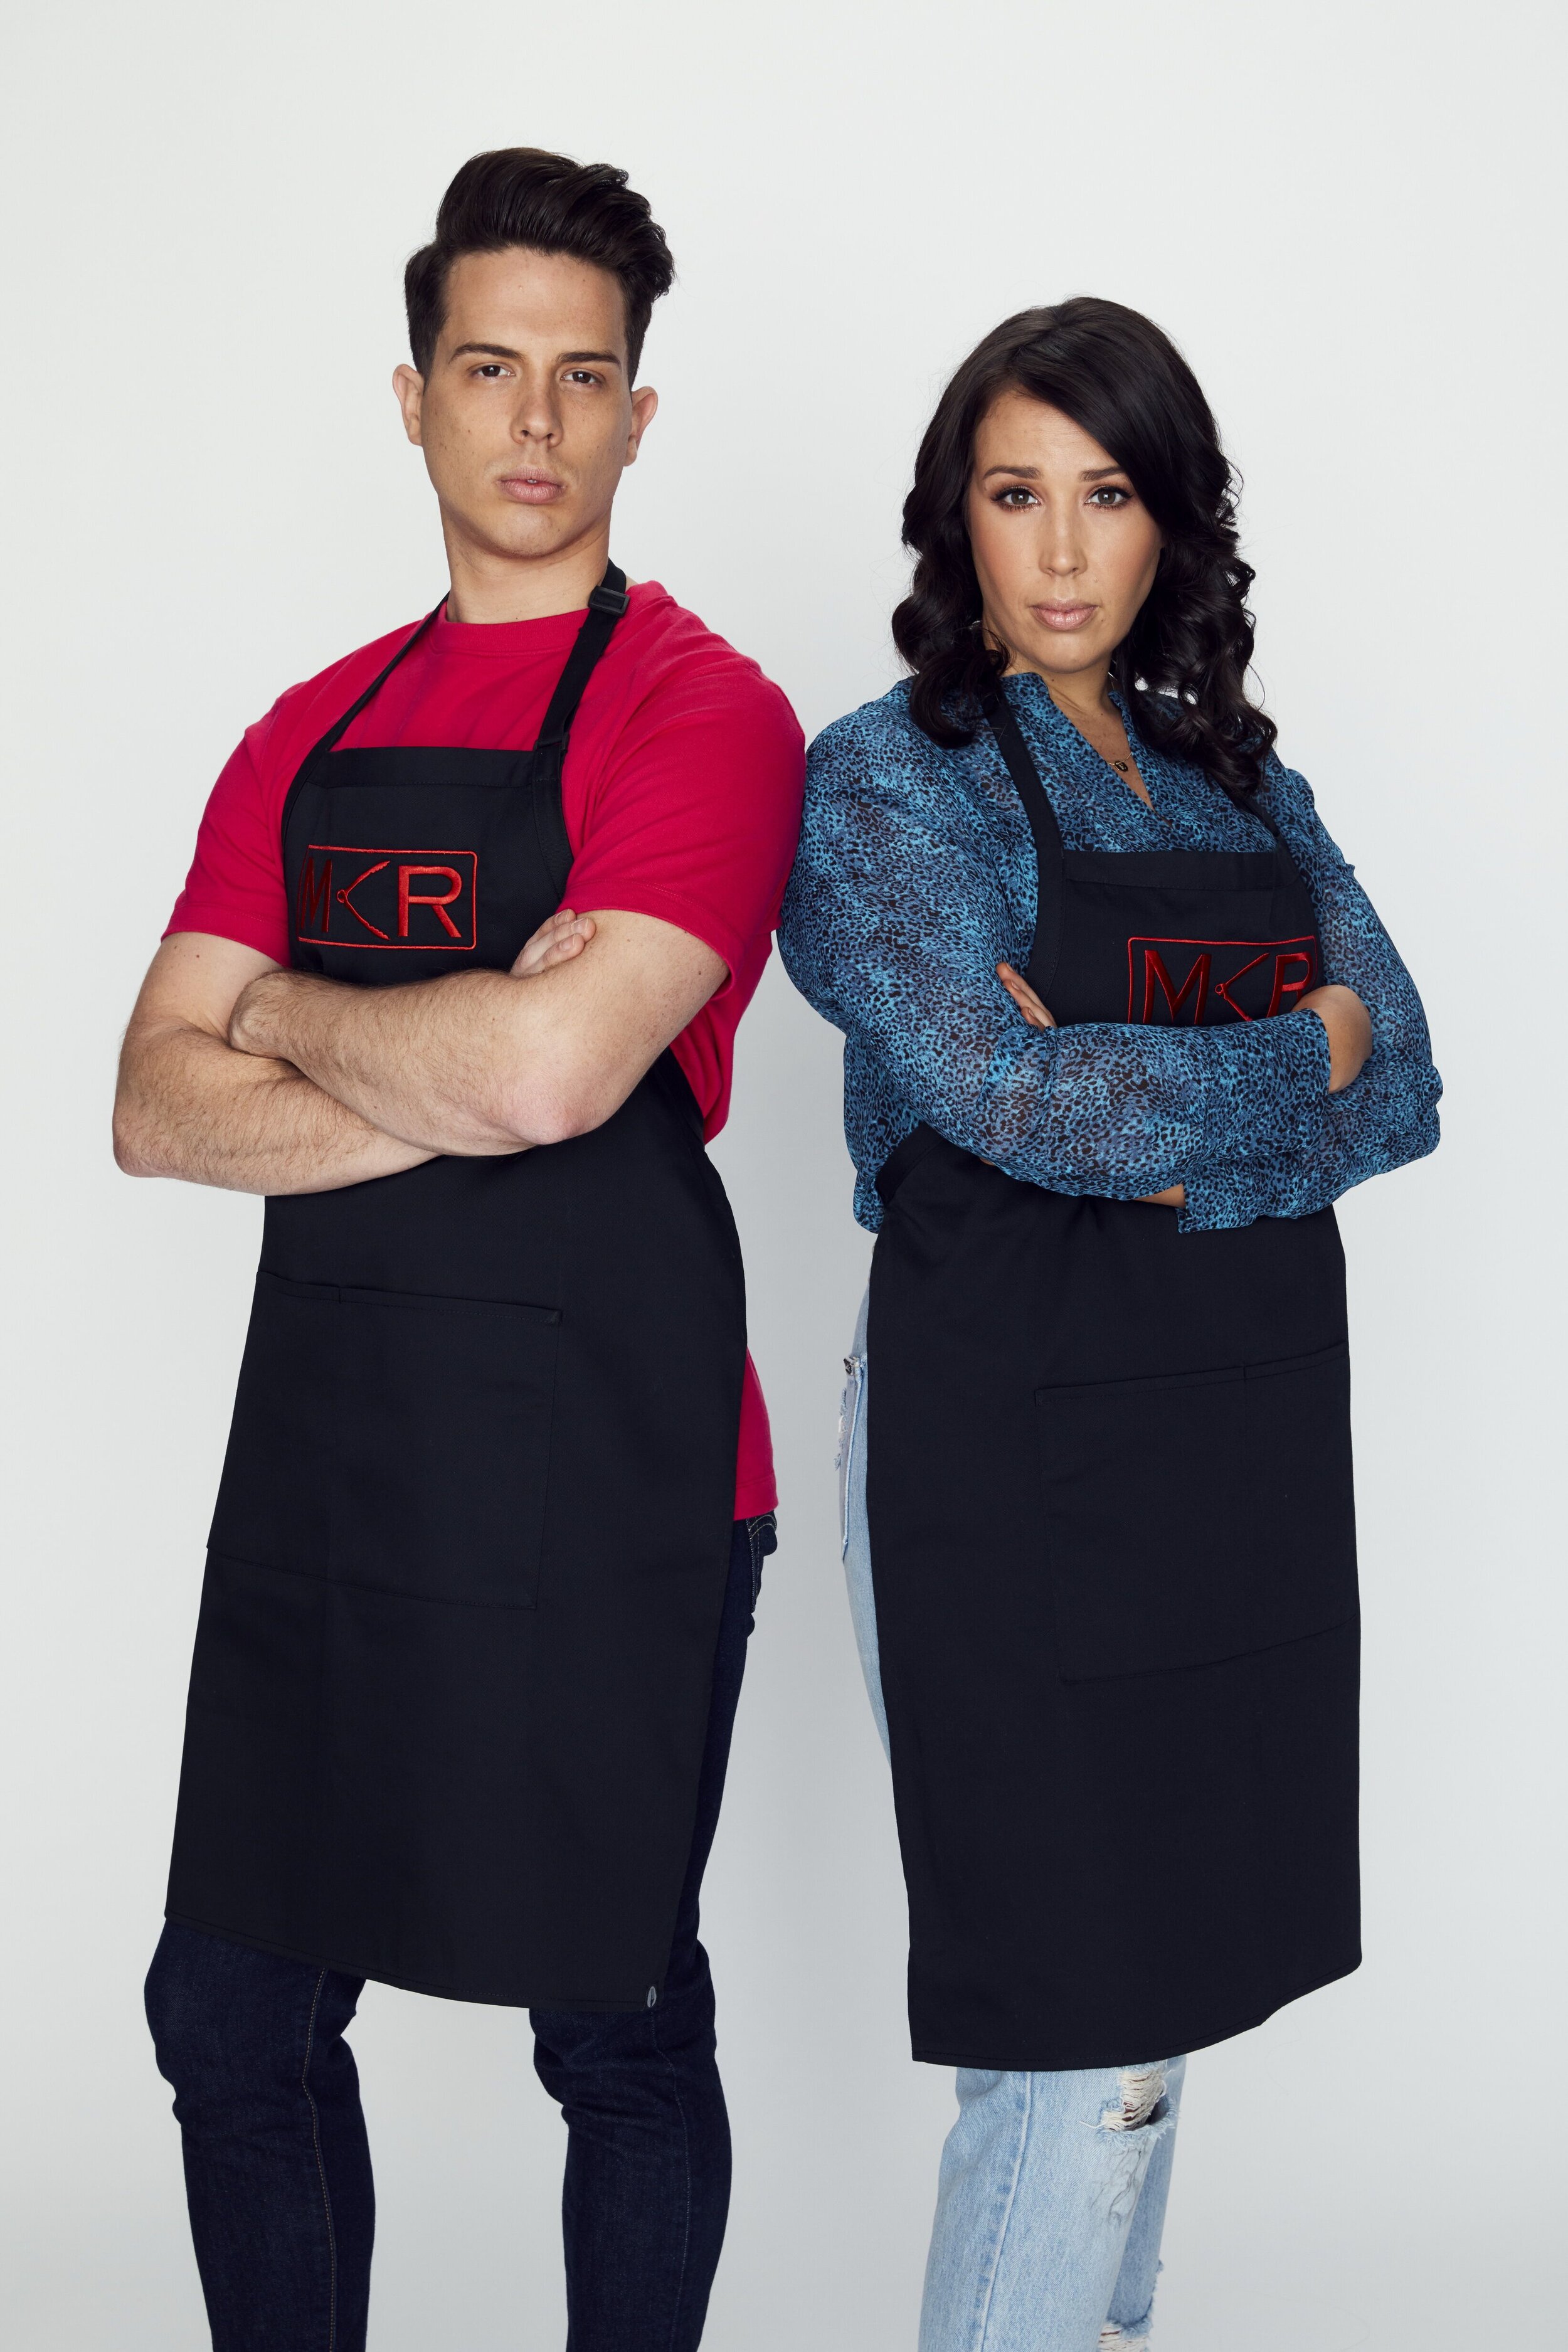   My Kitchen Rules: The Rivals   Source: Seven Network 